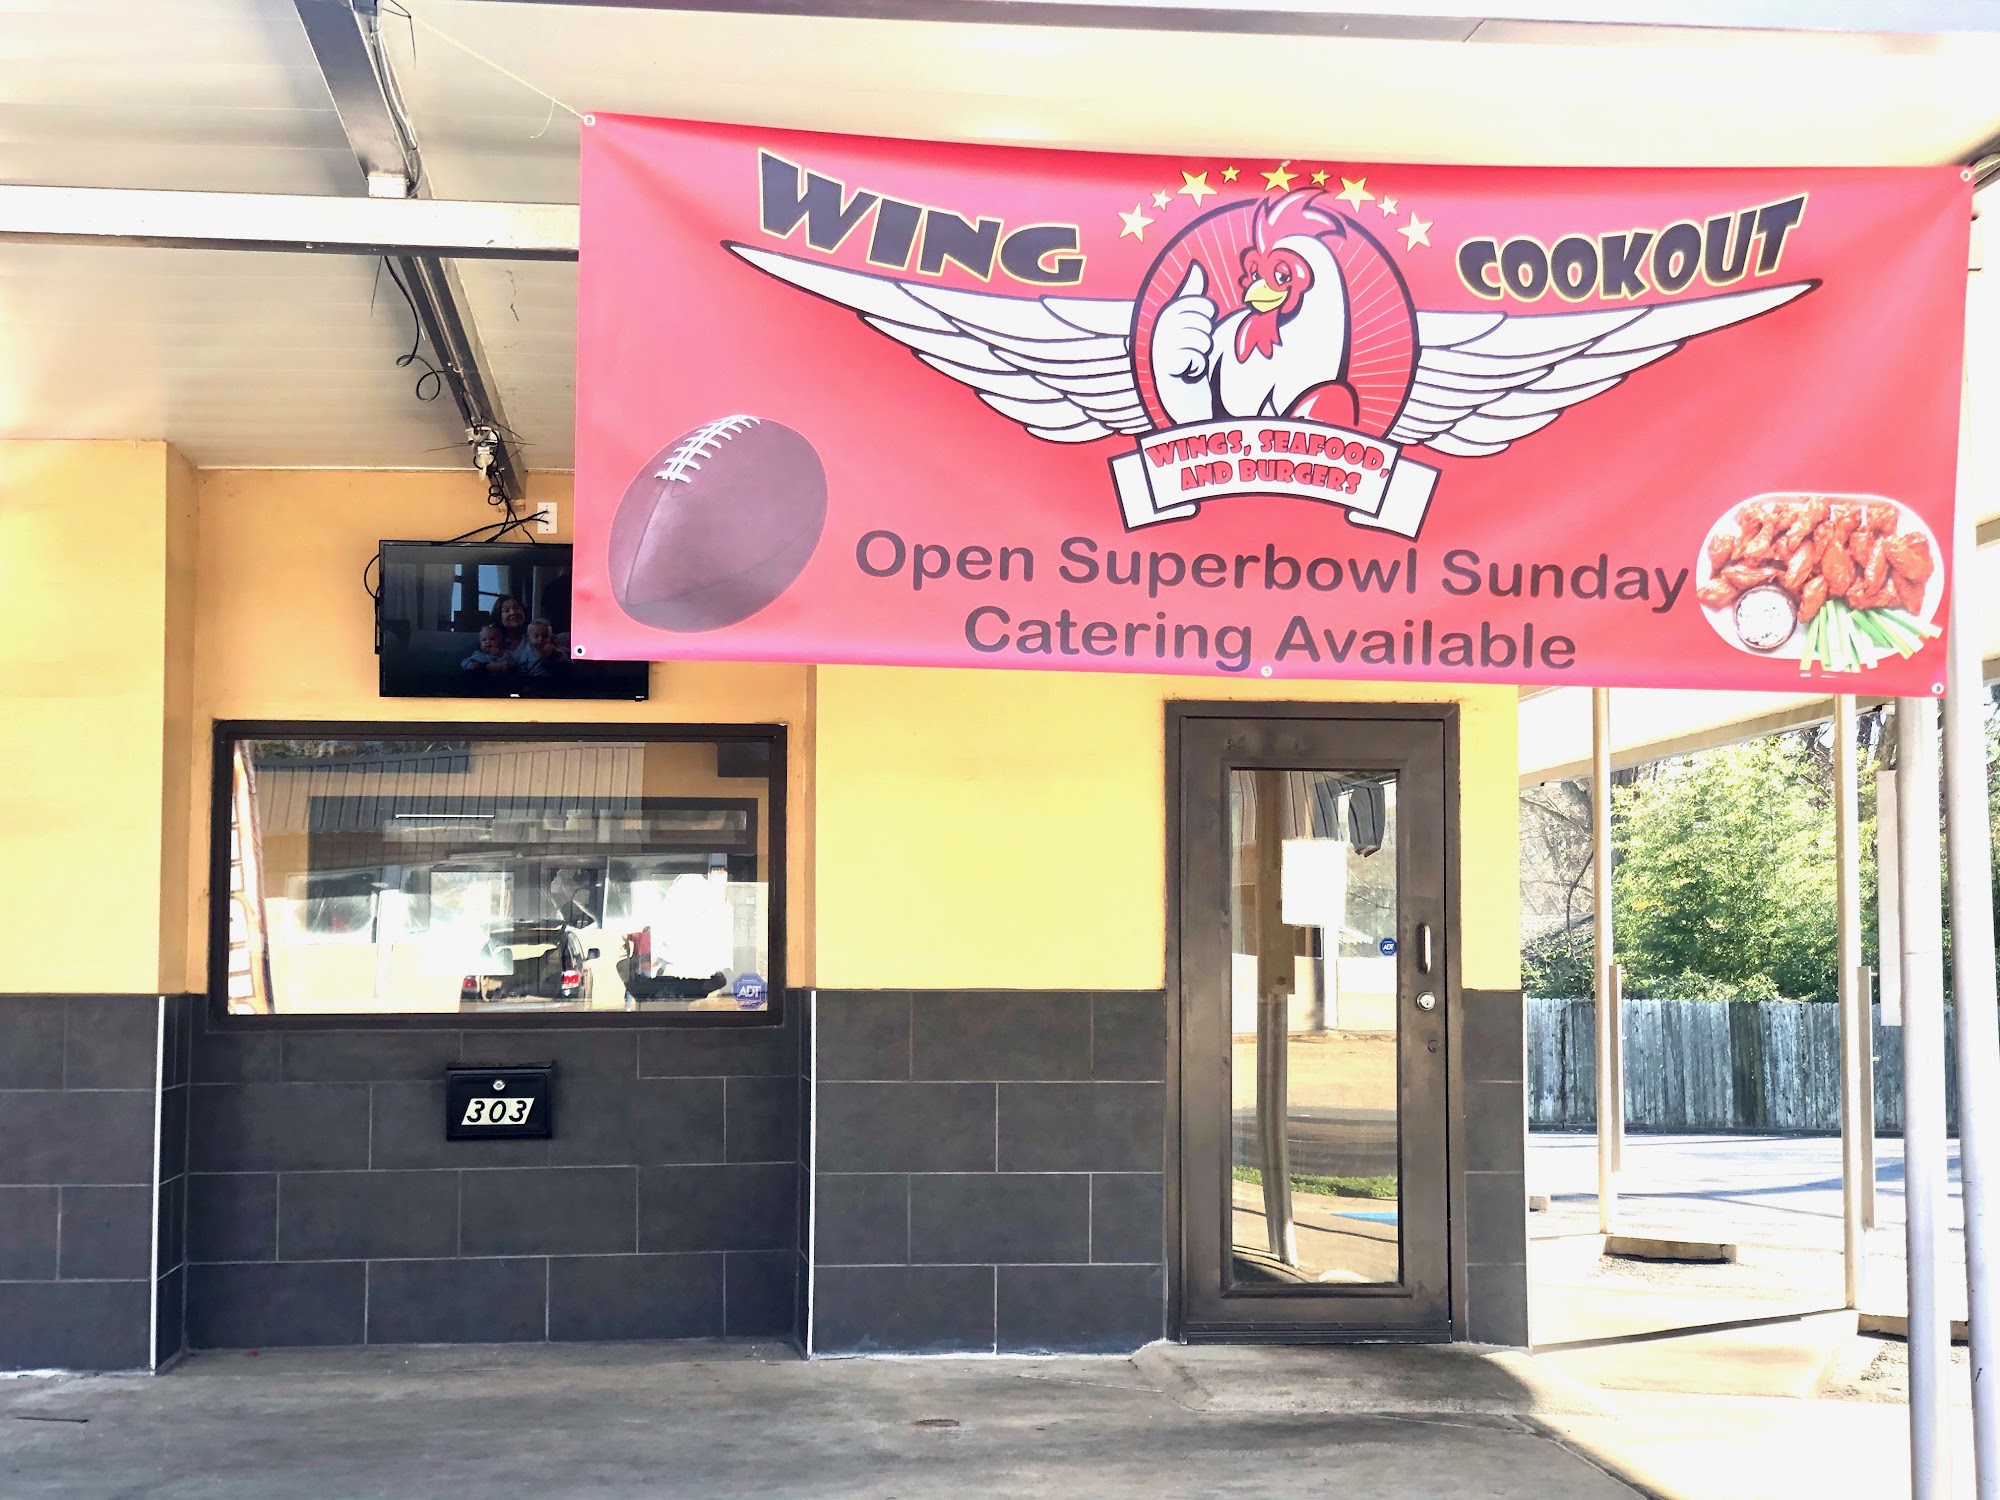 Wing Cookout Express